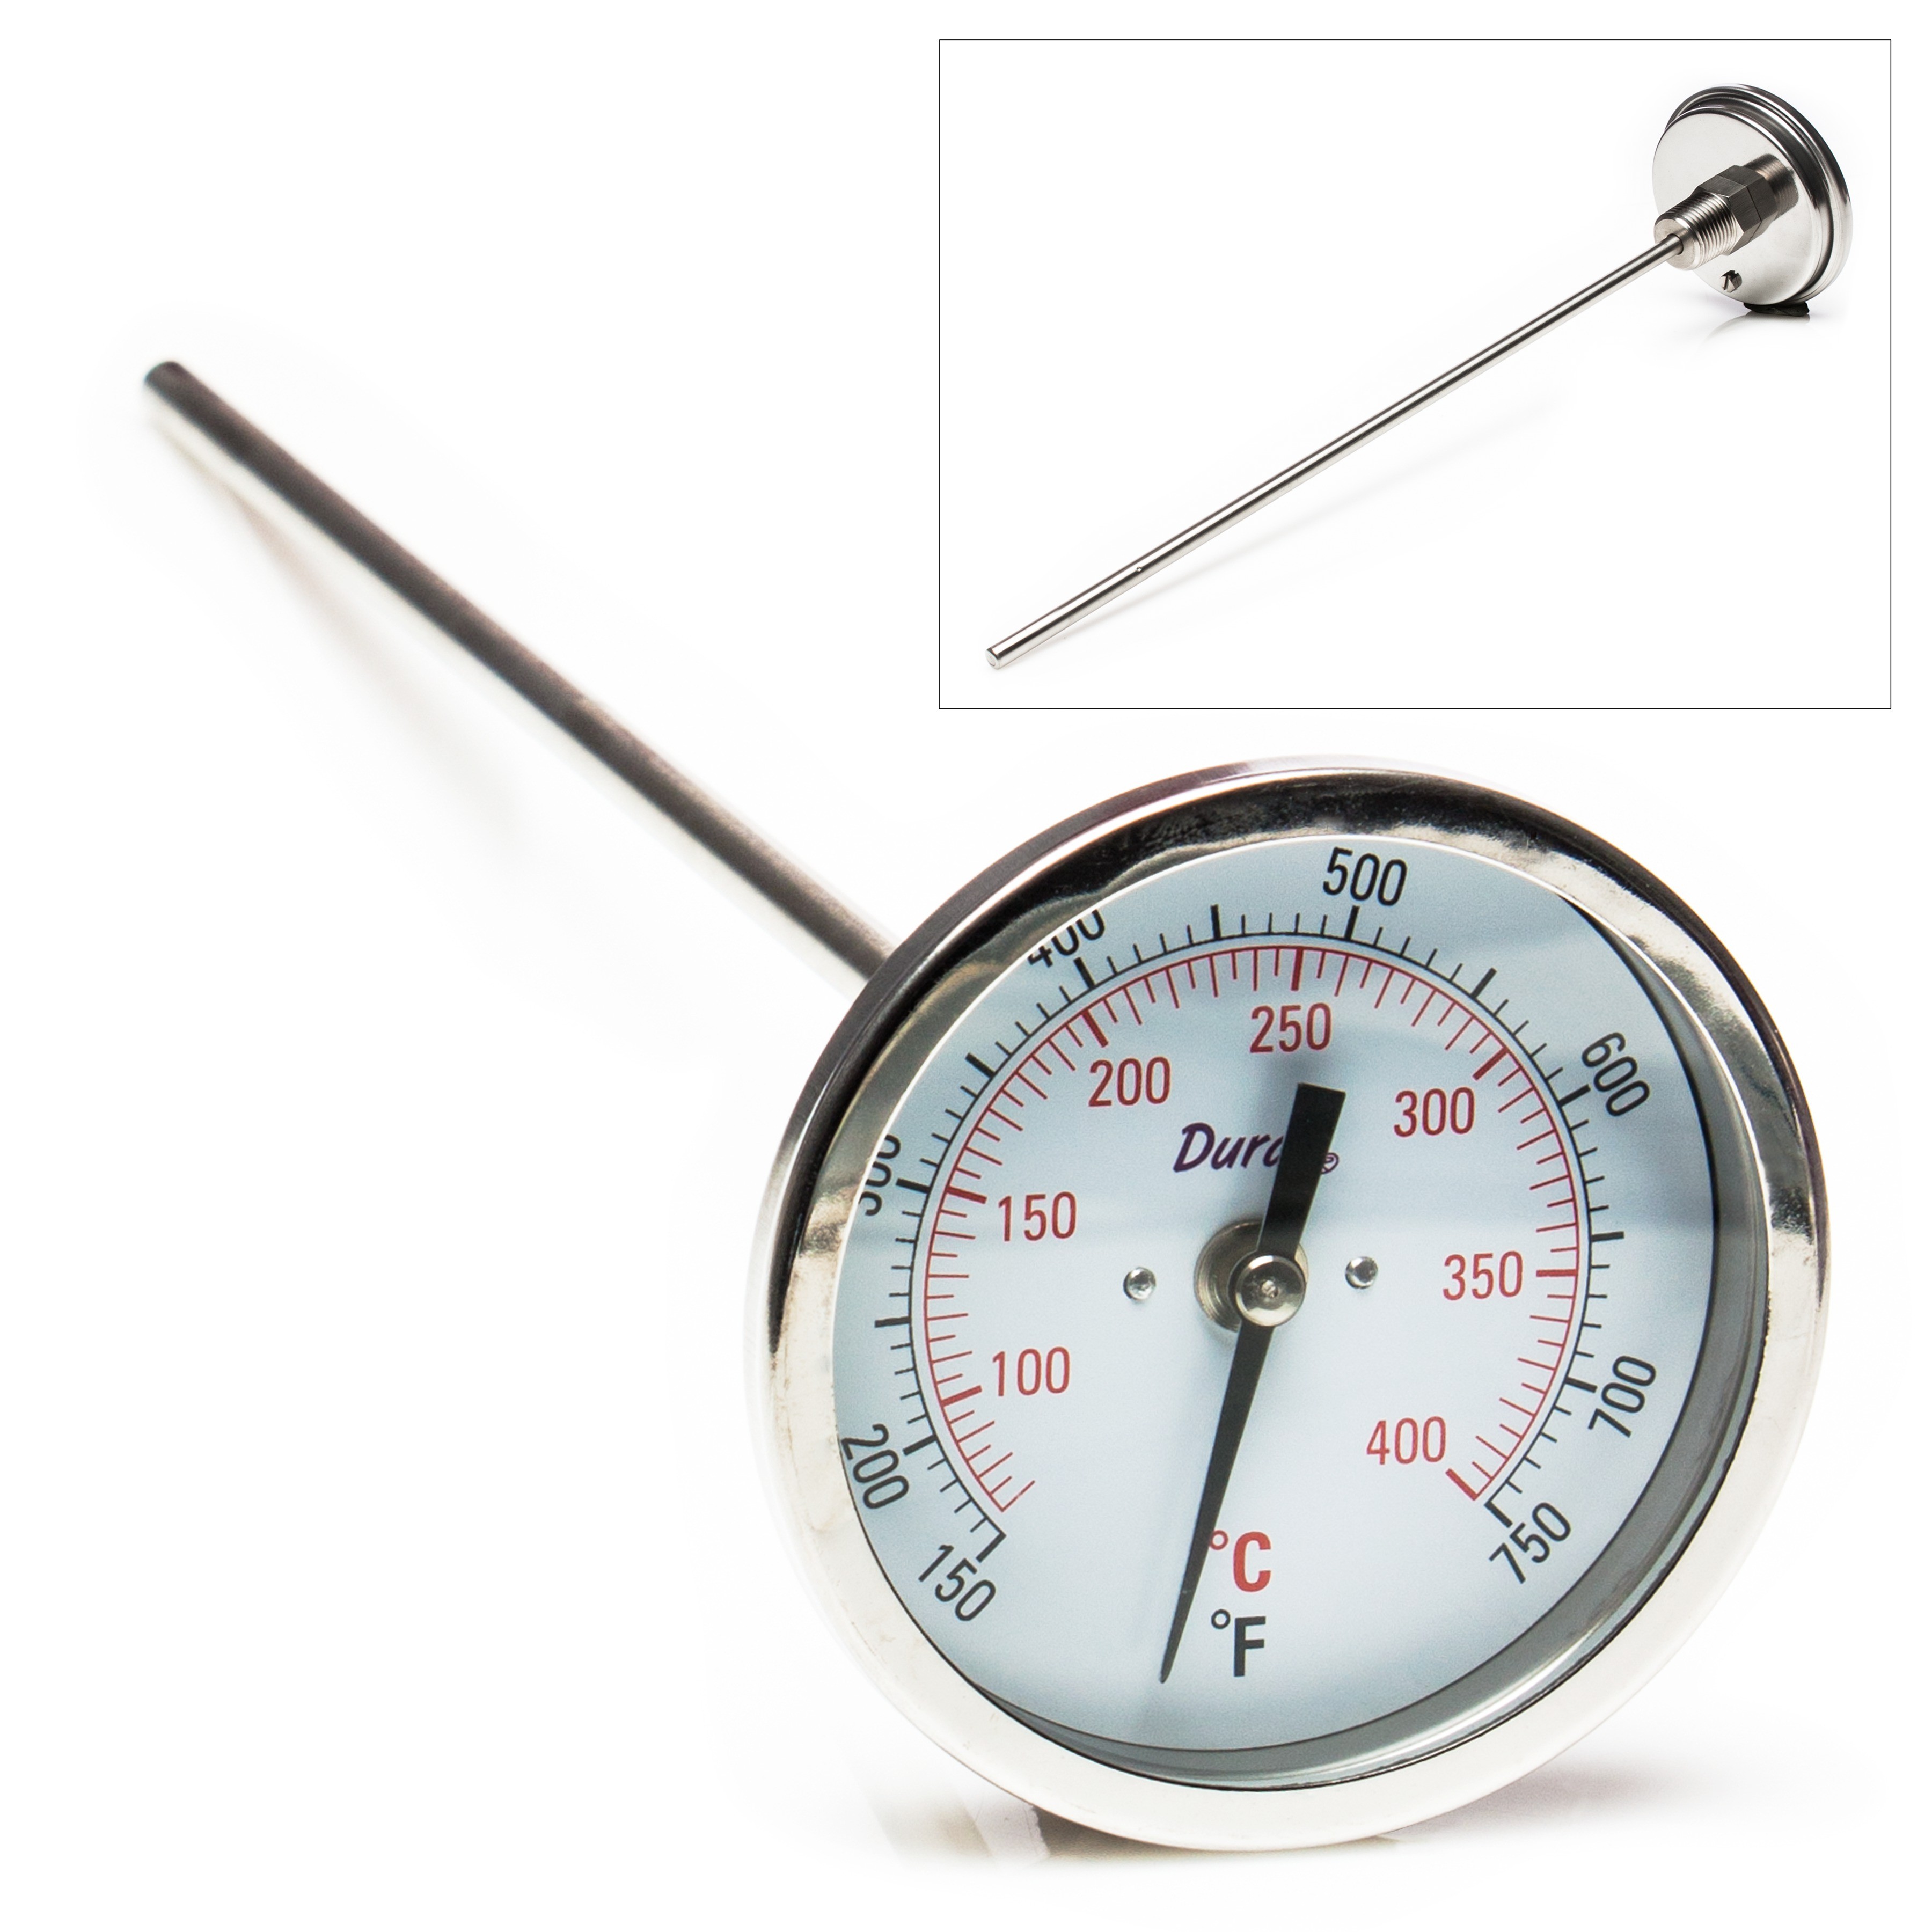 SP Bel-Art, SP Bel-Art, H-B DURAC Bi-Metallic Dial Thermometer; 70 to 400C  (150 to 750F), 1/2 in. NPT Threaded Connection, 75mm Dial